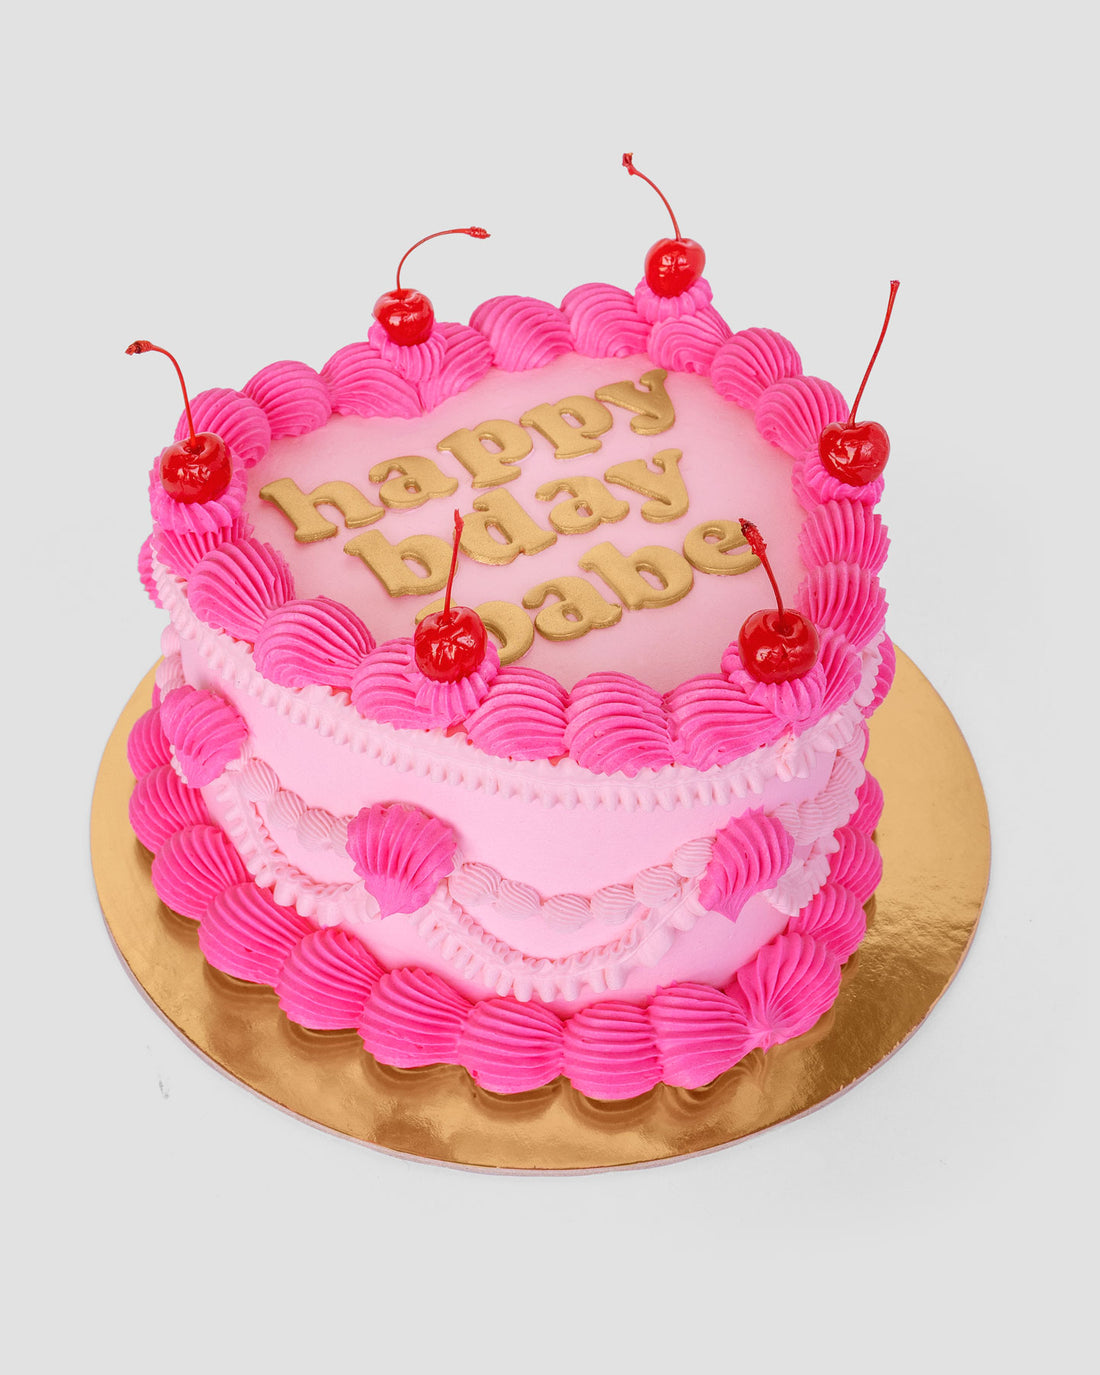 Design This Cake- Cake Size: Tall | Cake Colour: Soft Pink | Piping Style: Fancy | Piping Colours: Soft Pink + Hot Pink | Add Cherries | Add Gold Lettering